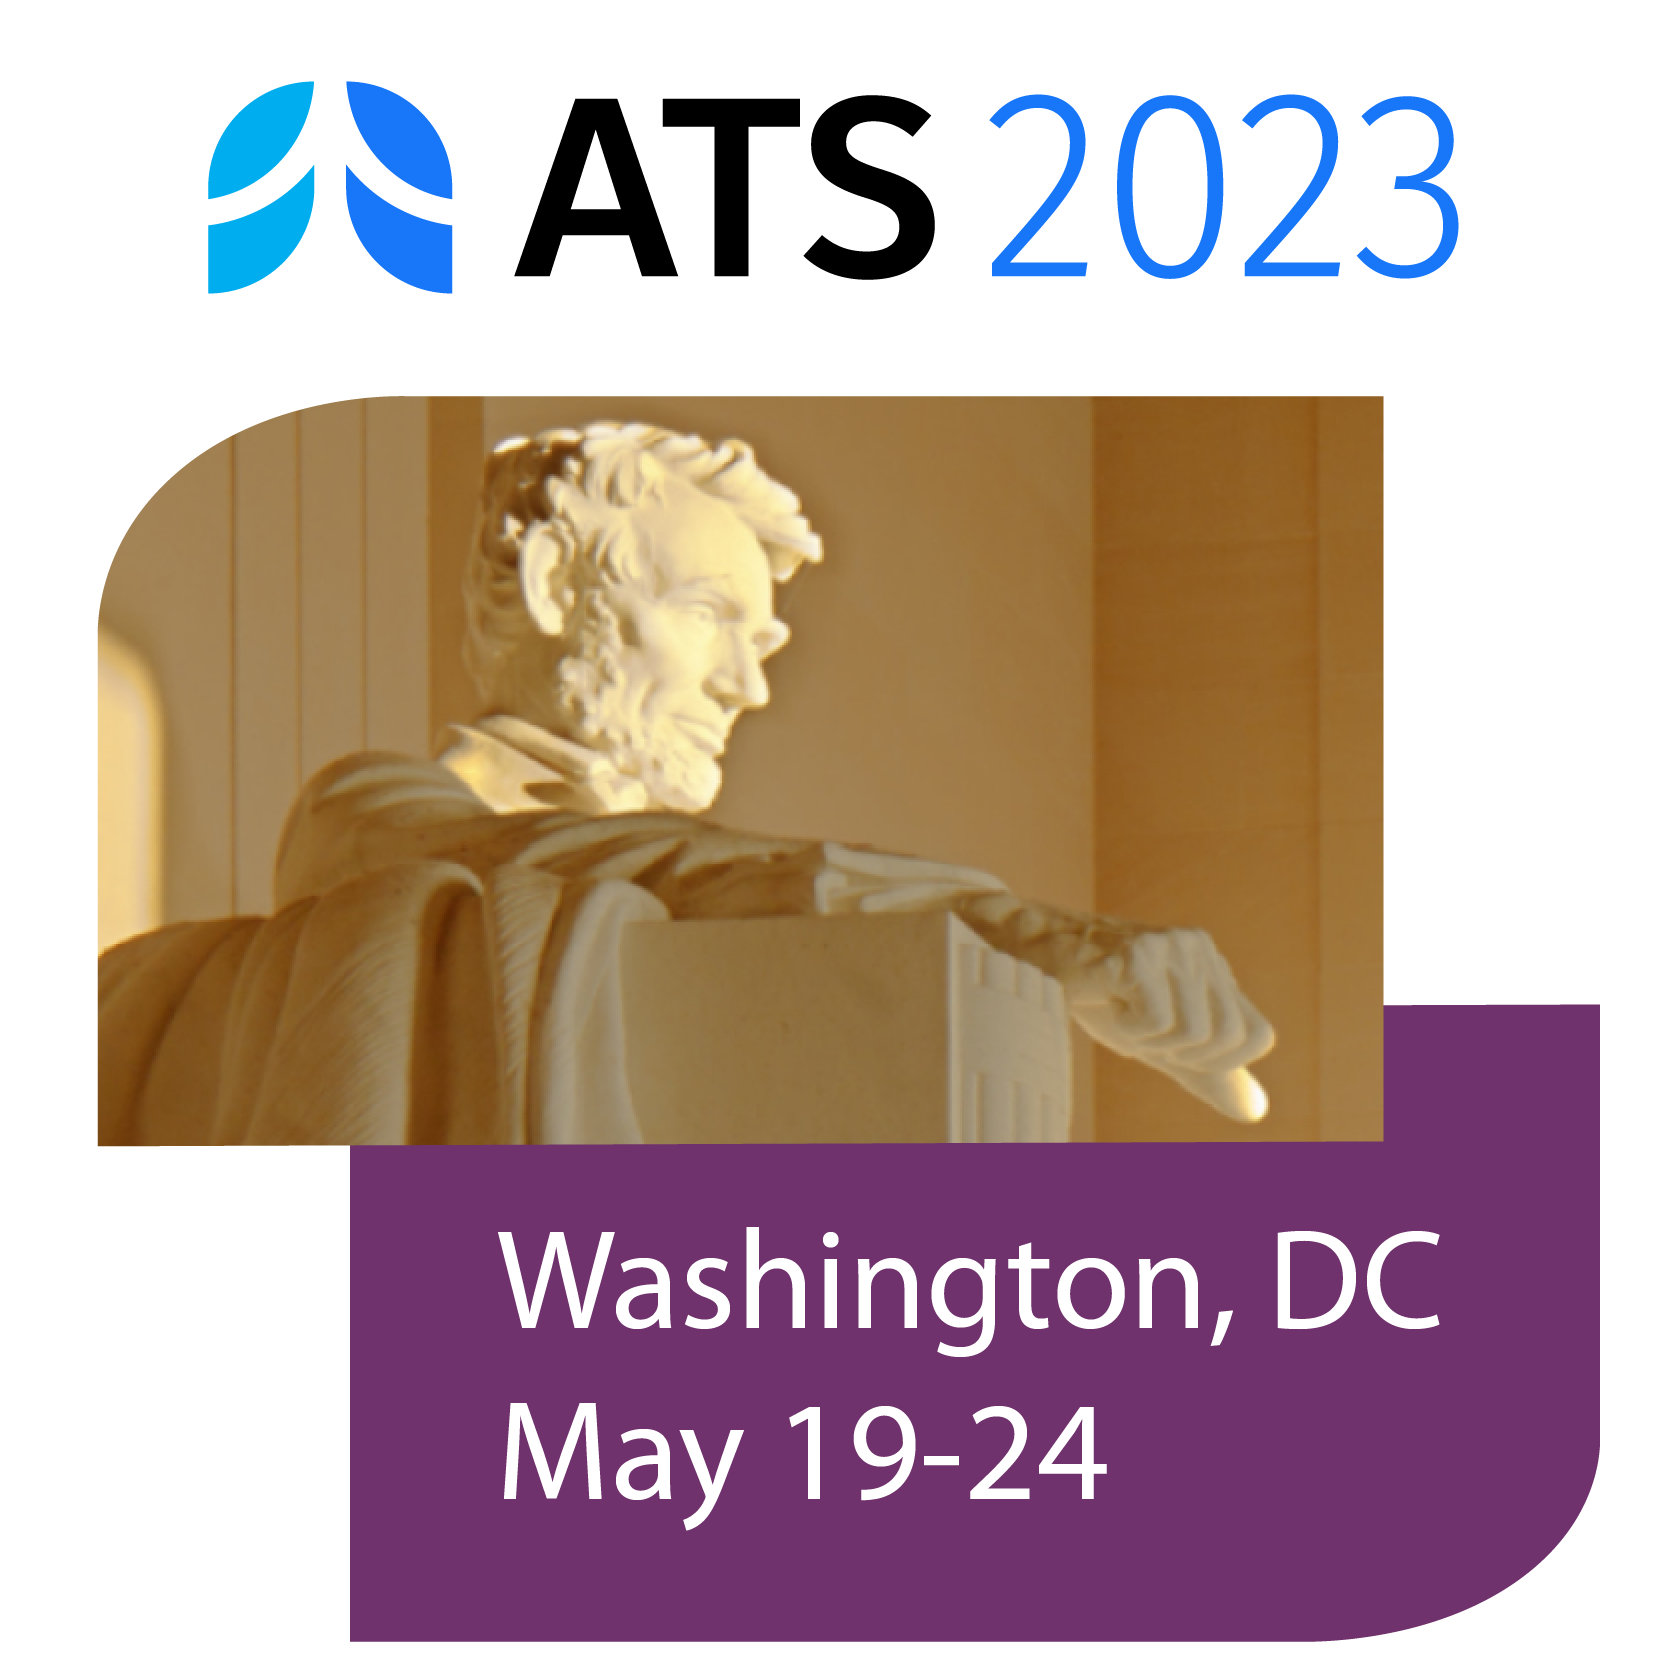 The American Thoracic Society International Conference - ATS 2023